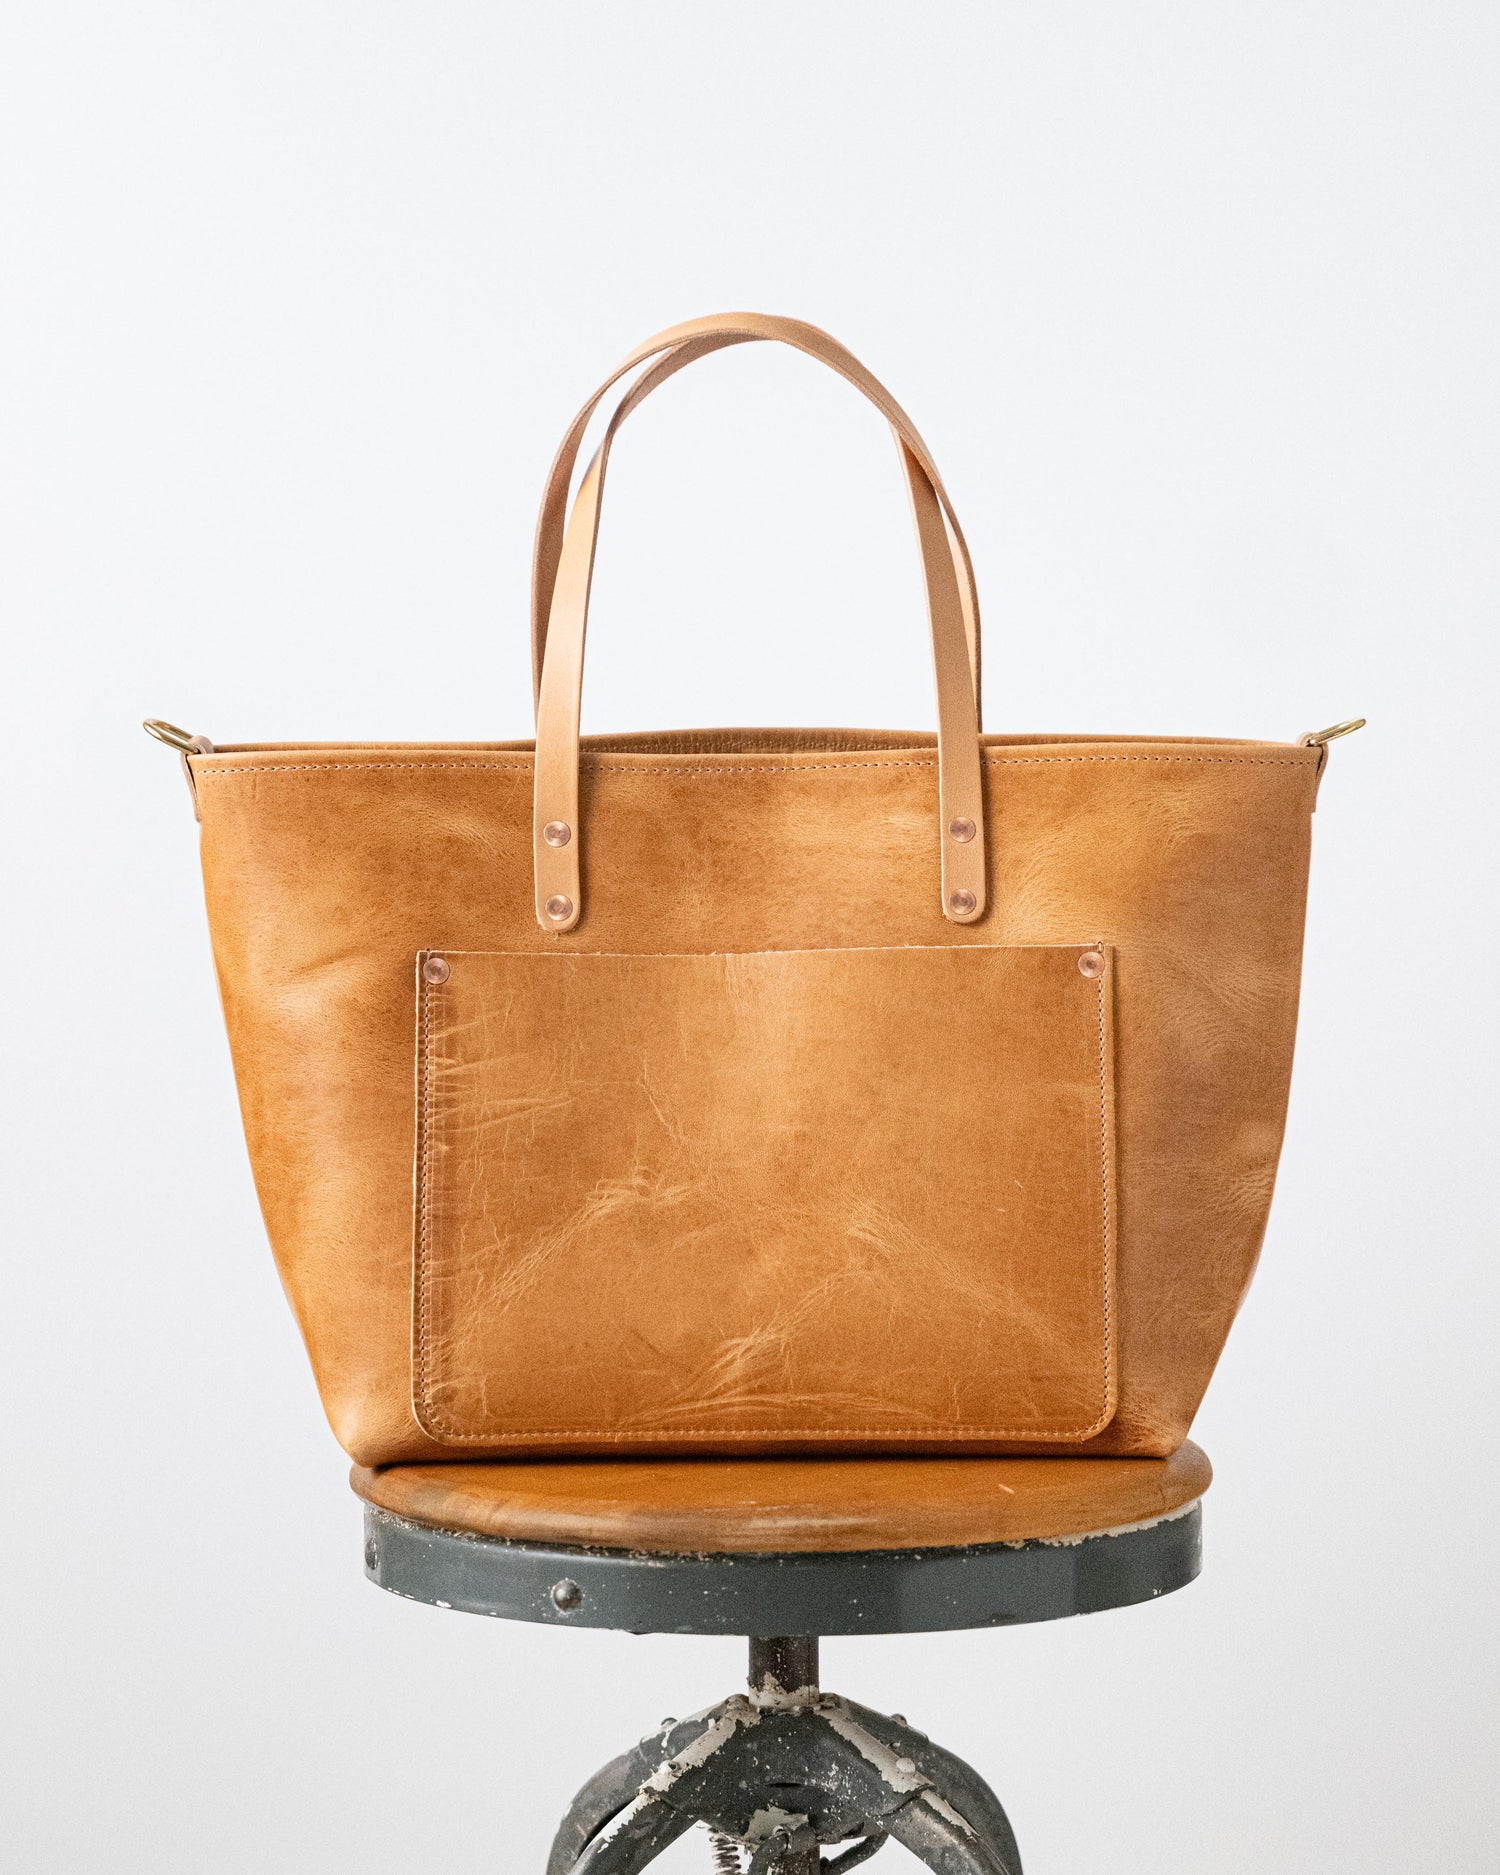 Scratch-and-Dent Natural Dublin Market Tote